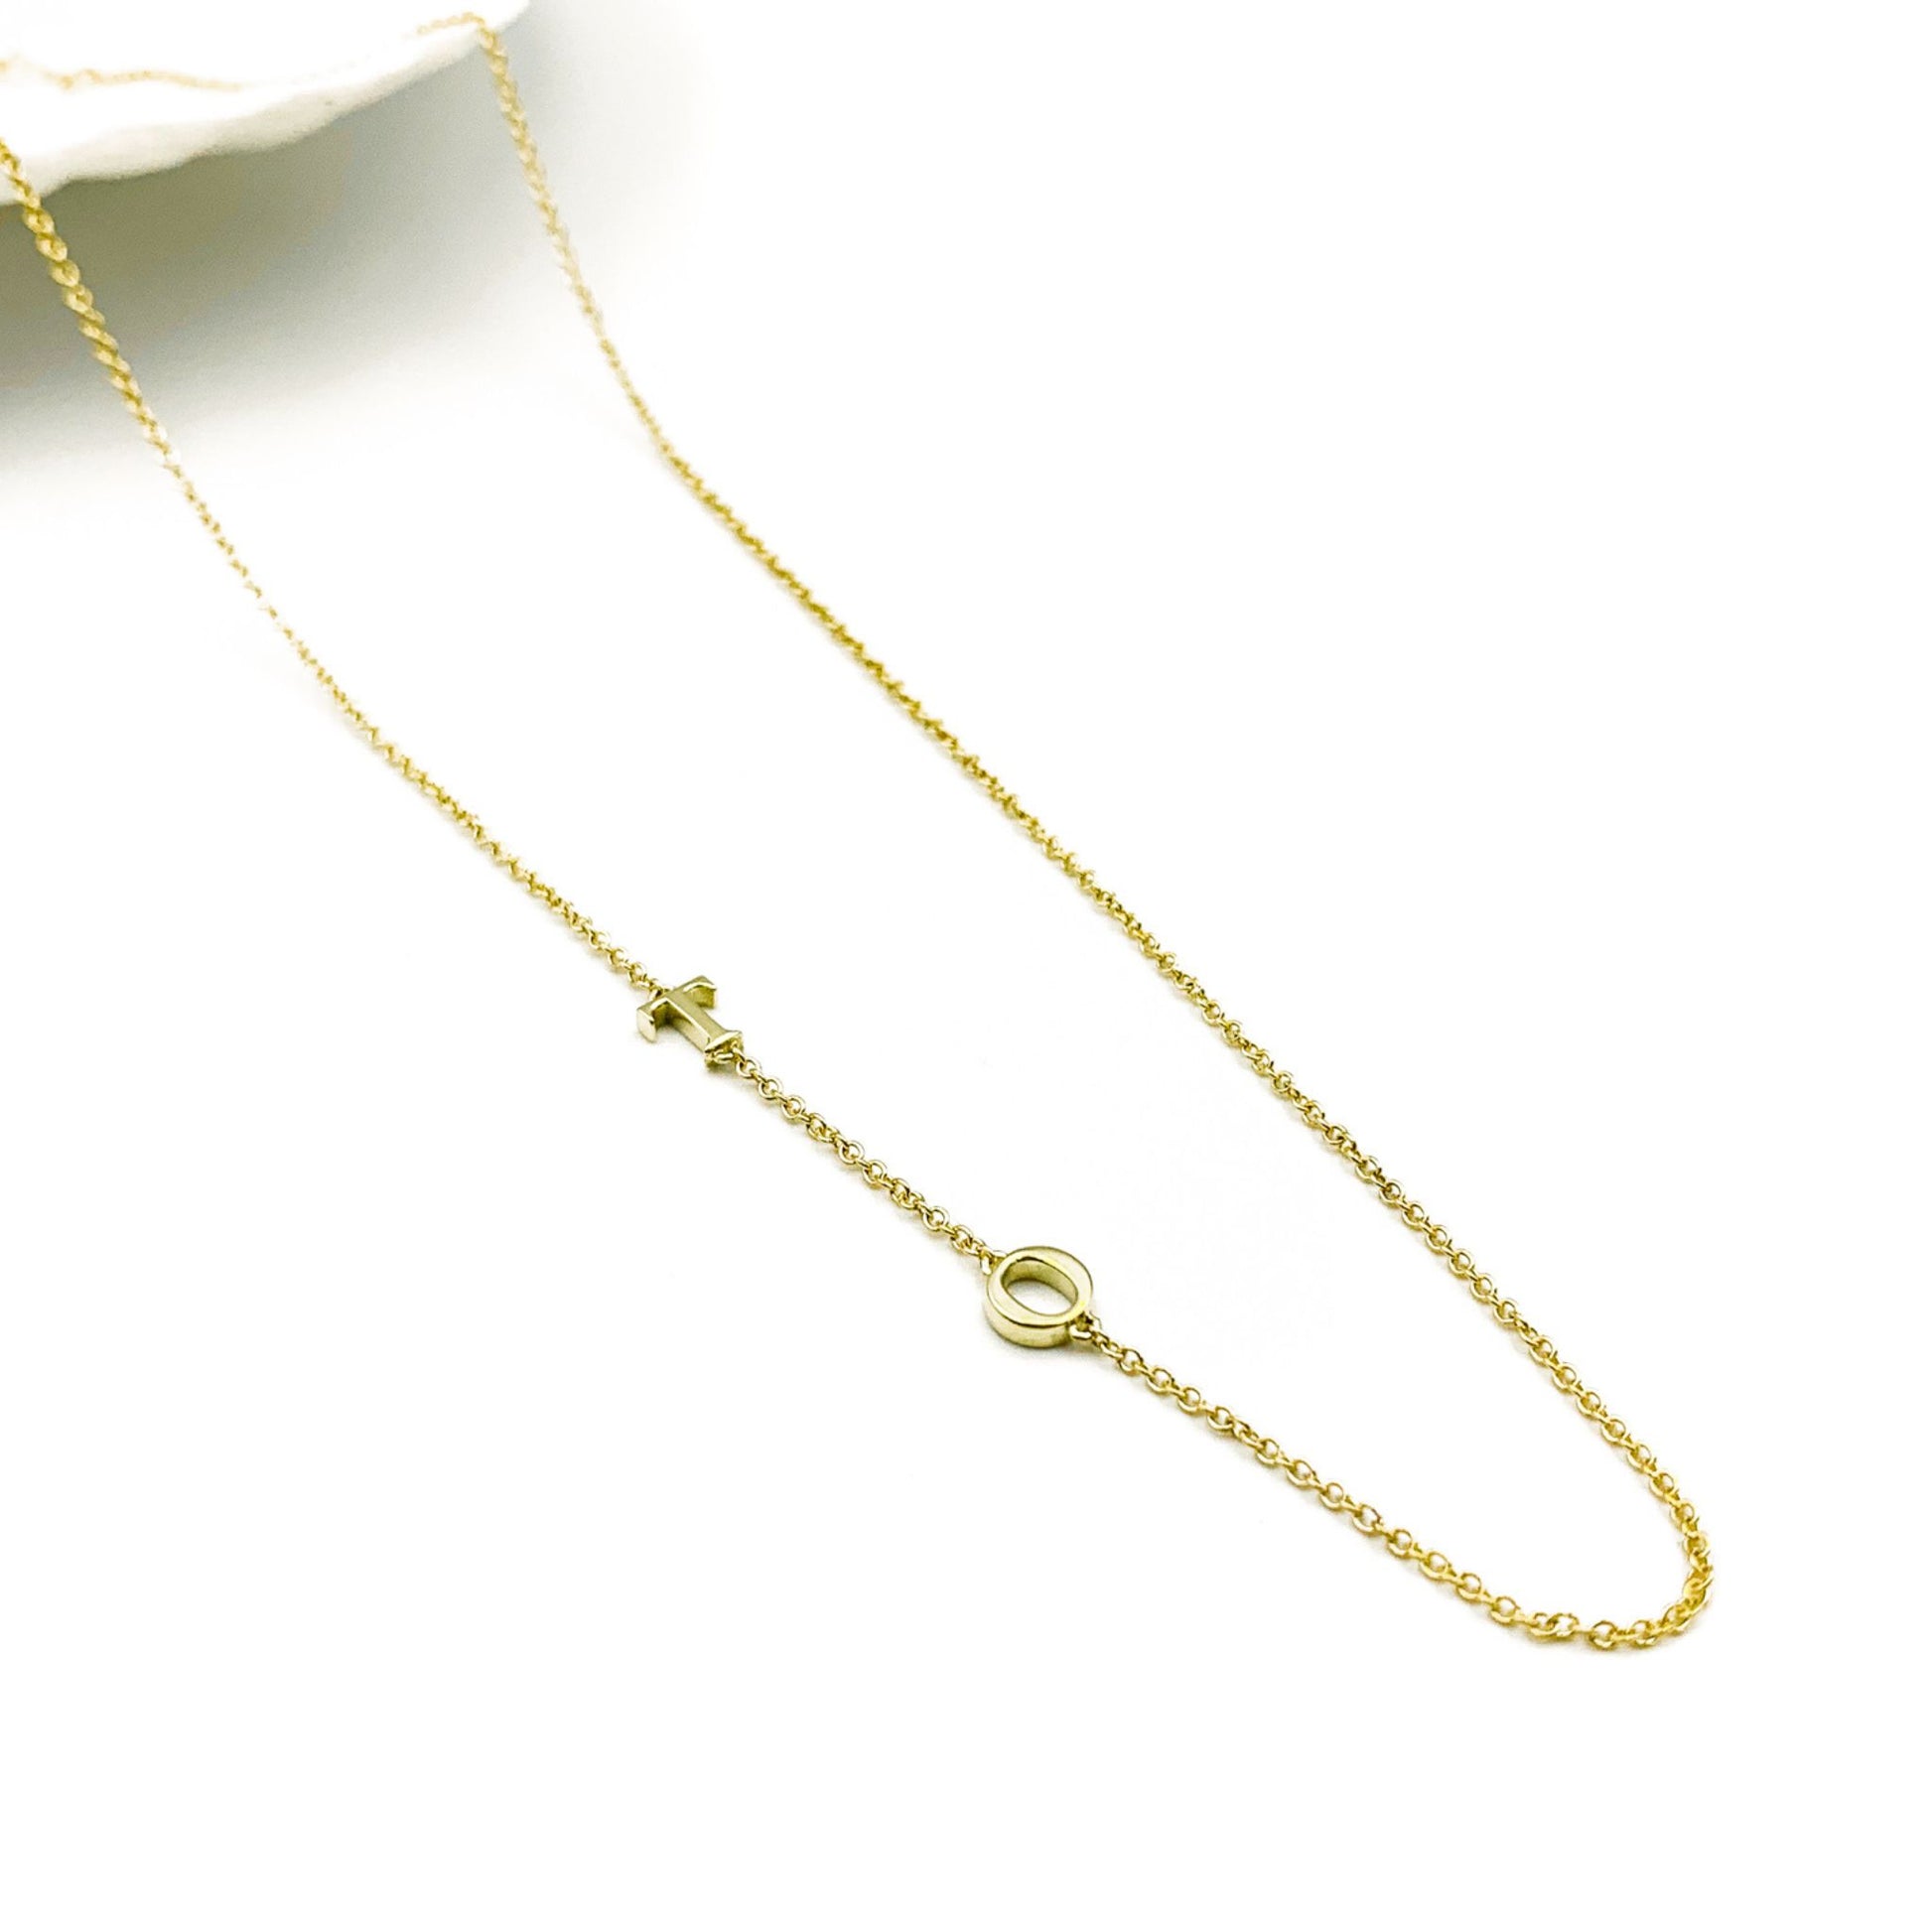 personalized 9ct yellow gold initial necklace available in South Africa